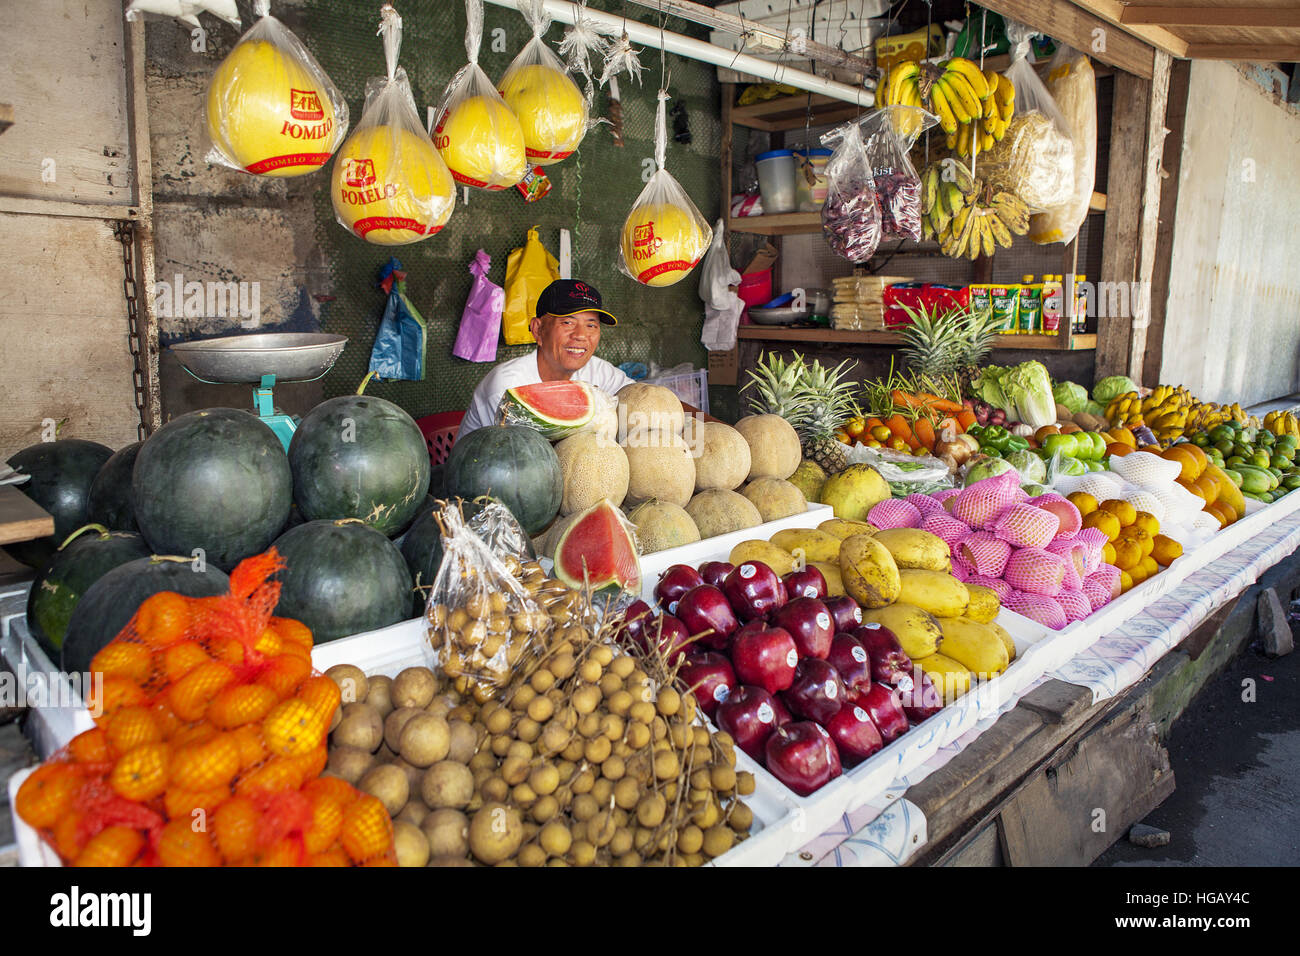 fruit stand business plan philippines